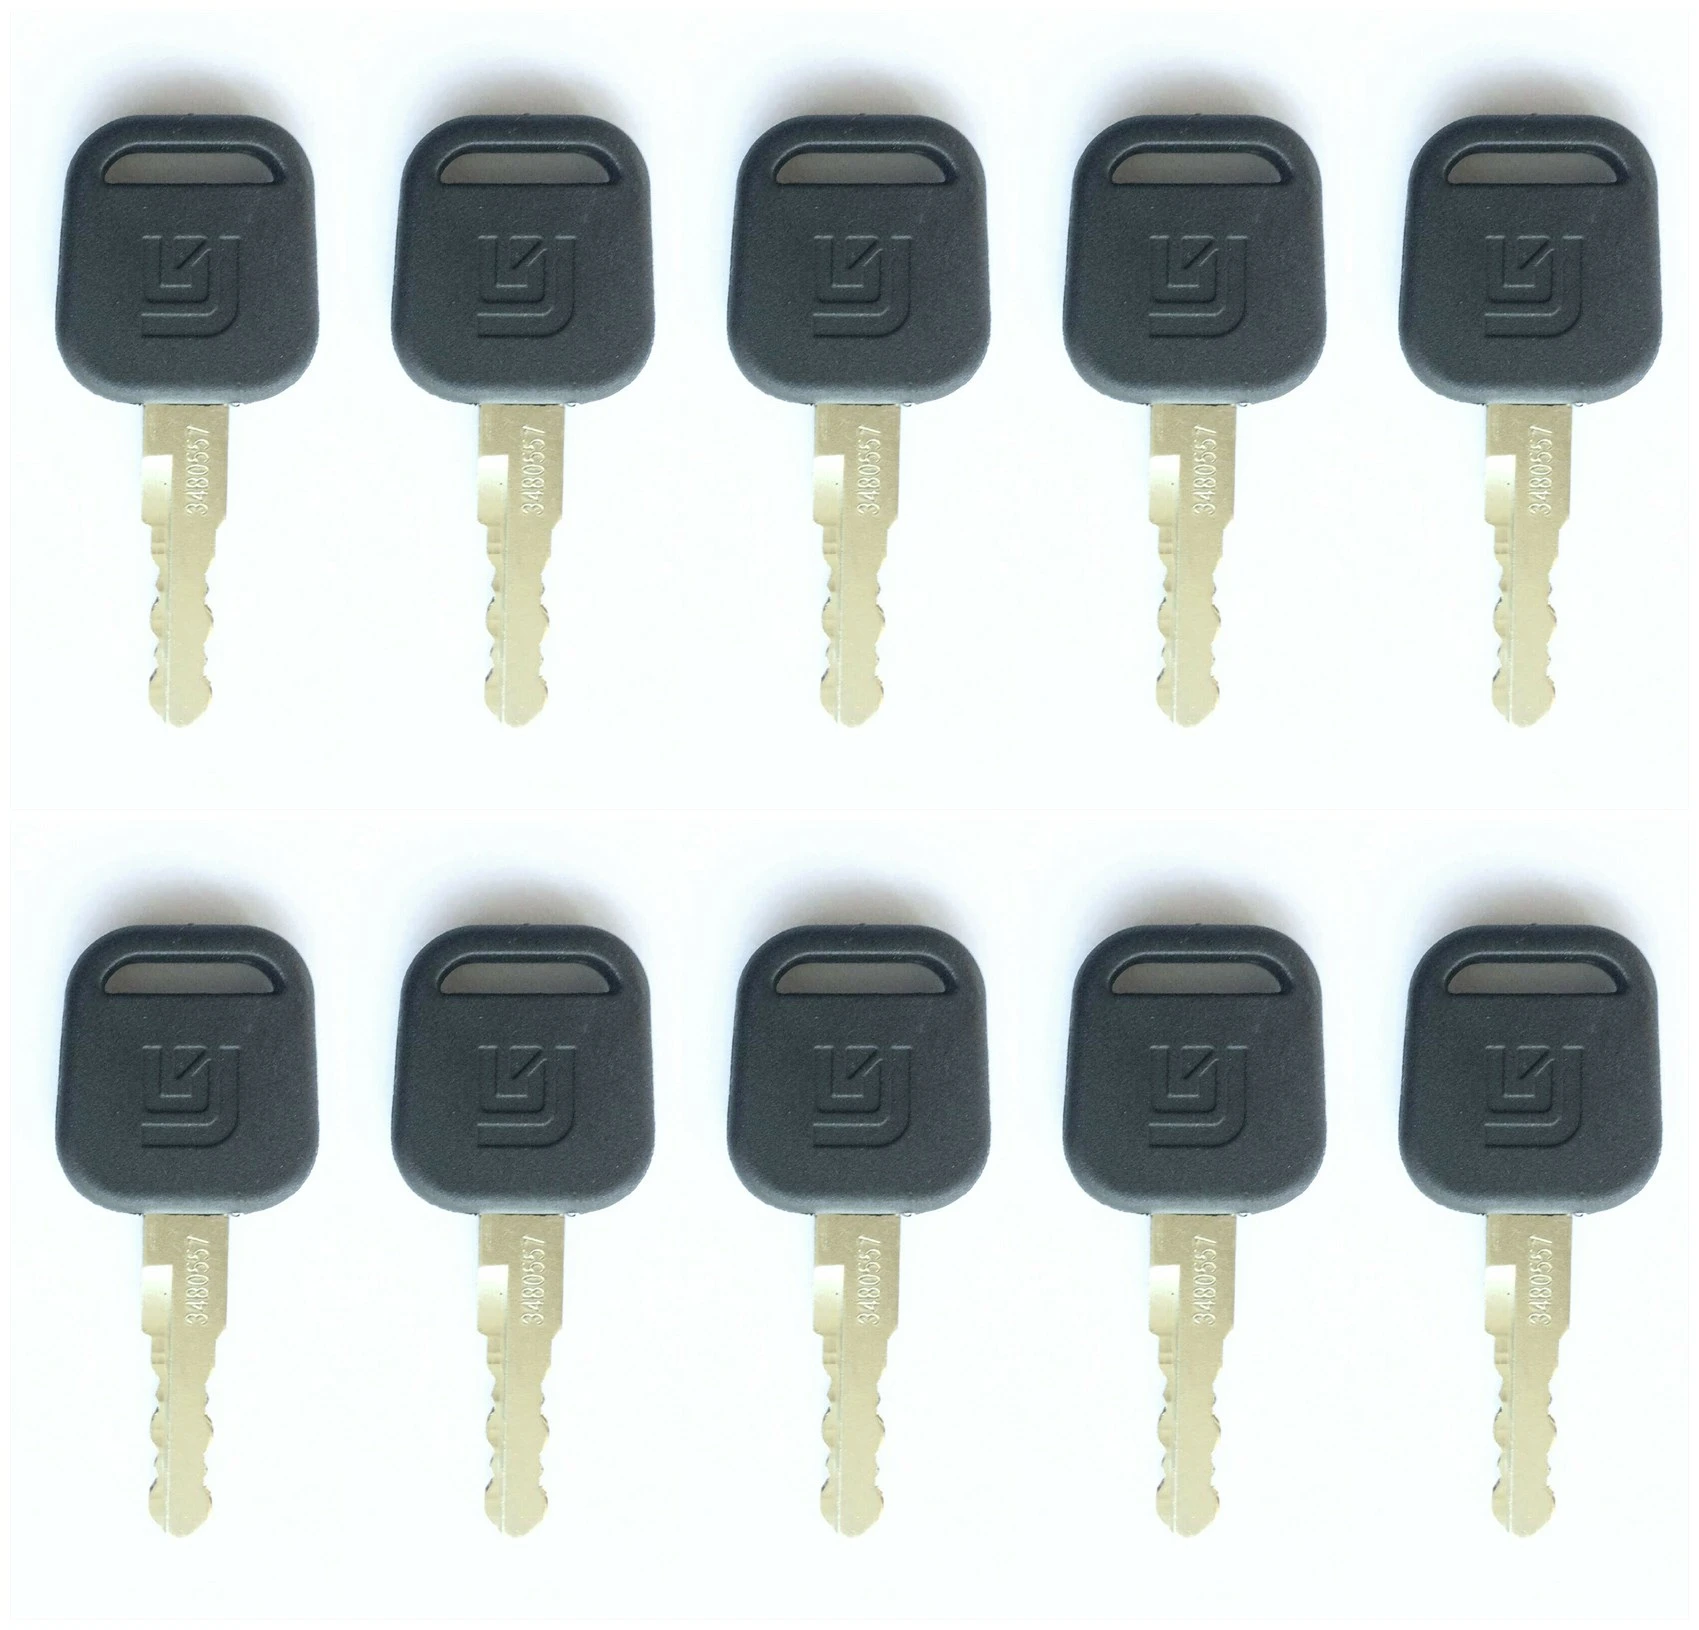 10key For Liugong Excavator and Heavy Equipment Ignition Keys 34B0557 diesel glow plugs Spark Plugs & Ignition Systems